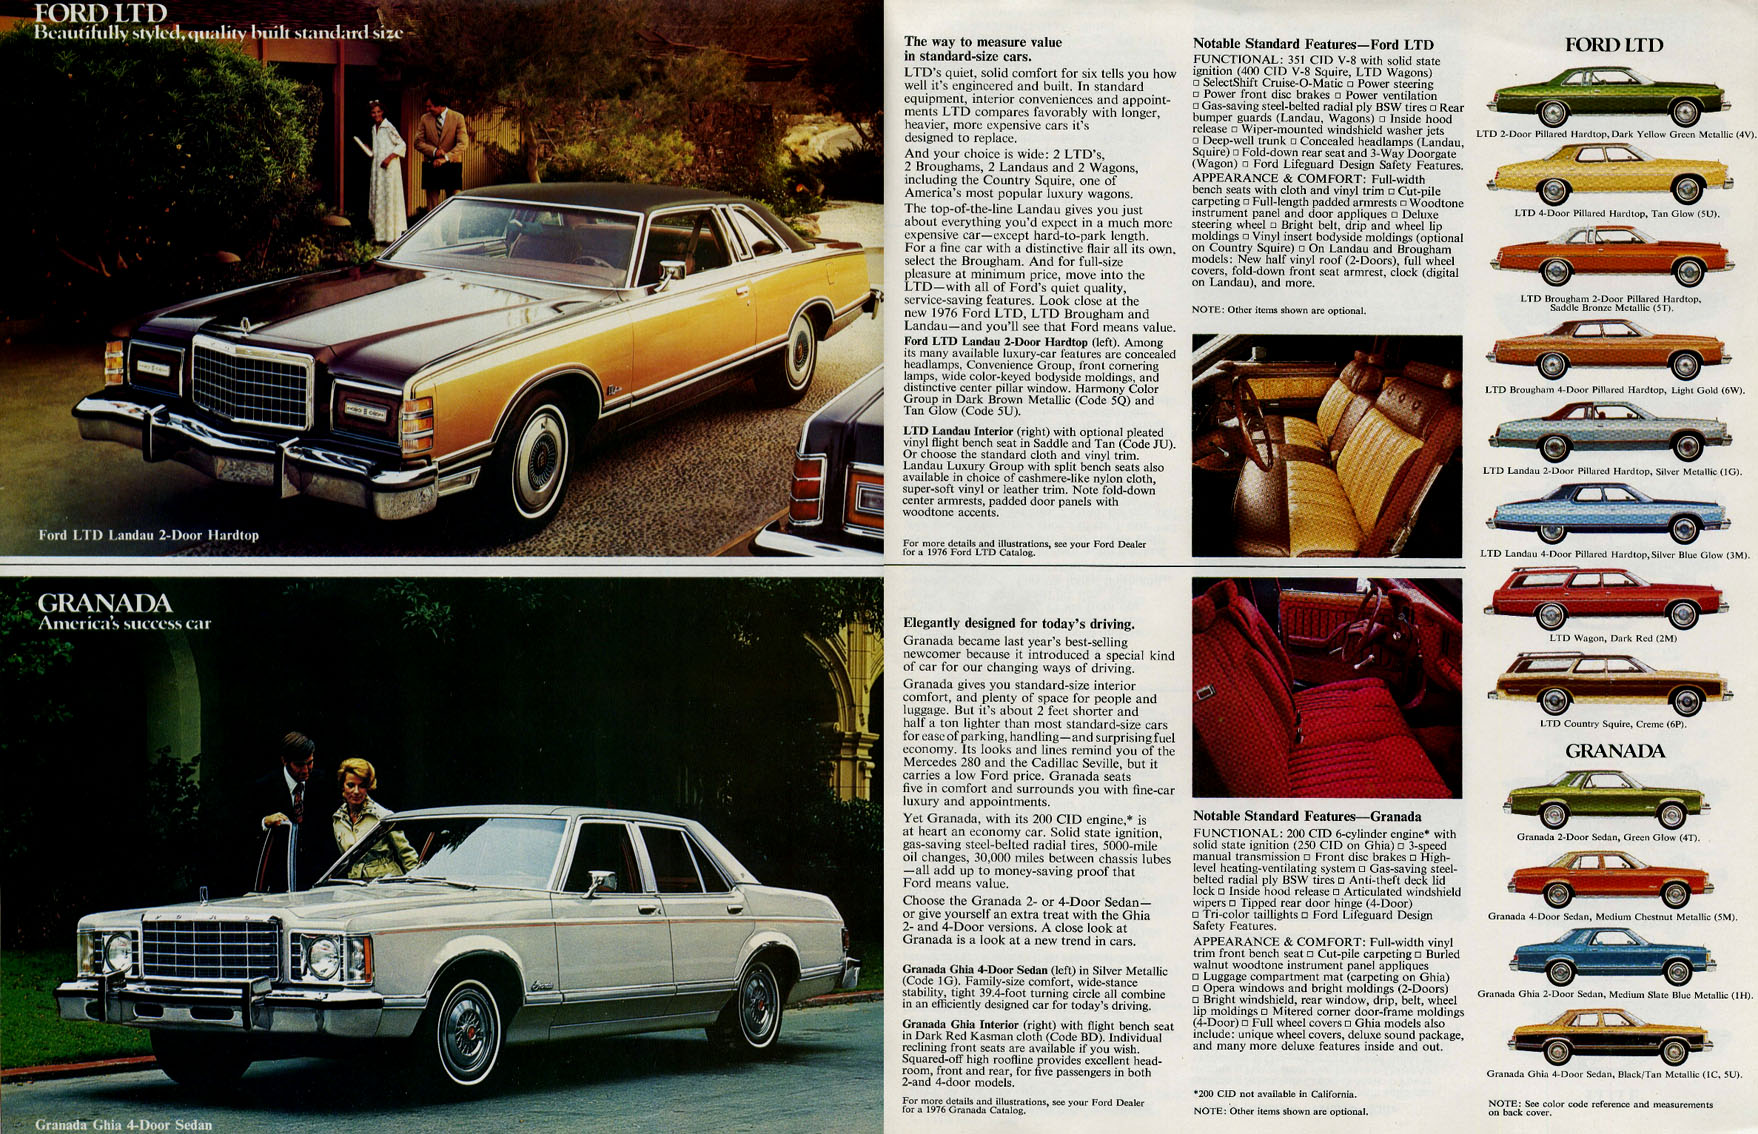 1976 Ford Foldout-03 amp 04